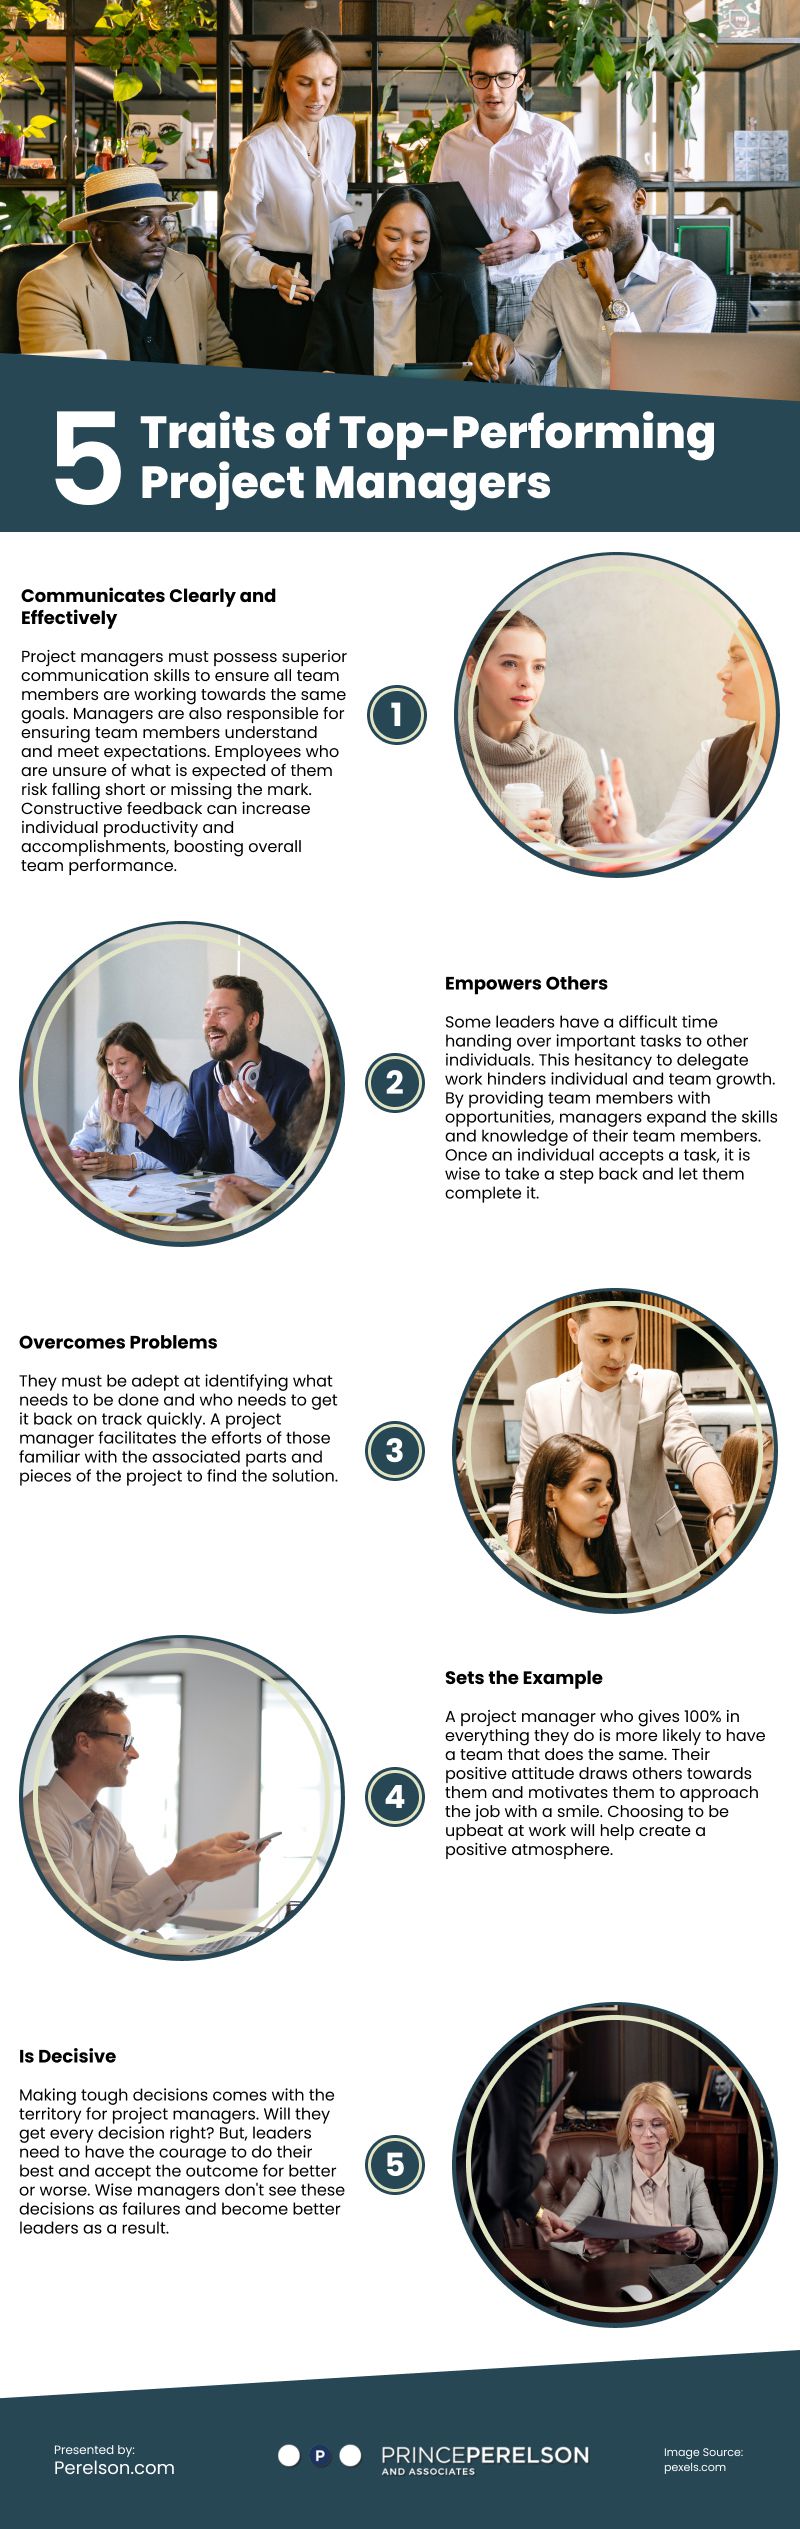 5 Traits of Top-Performing Project Managers Infographic